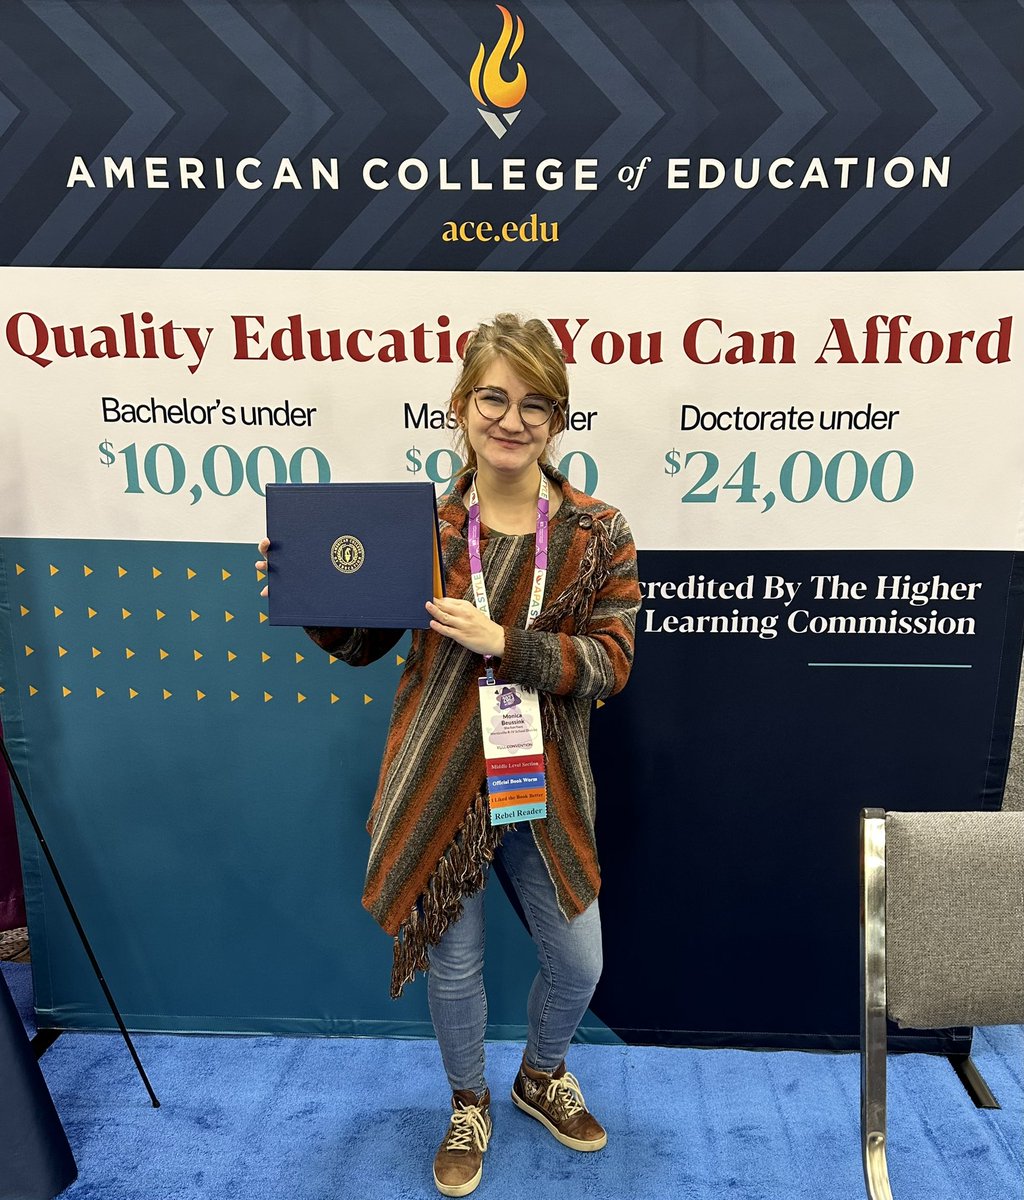 2 x alum, Monica Beussink, was so excited to bring her friend over to get info to start her Ed.D. with us. Monica obtained her M.Ed. in C&I, and her Ed.D. in Leadership with @ACEedu! It was great meeting you, Monica, & thank you for being such an ACE advocate! #ACEALUMNI🔥